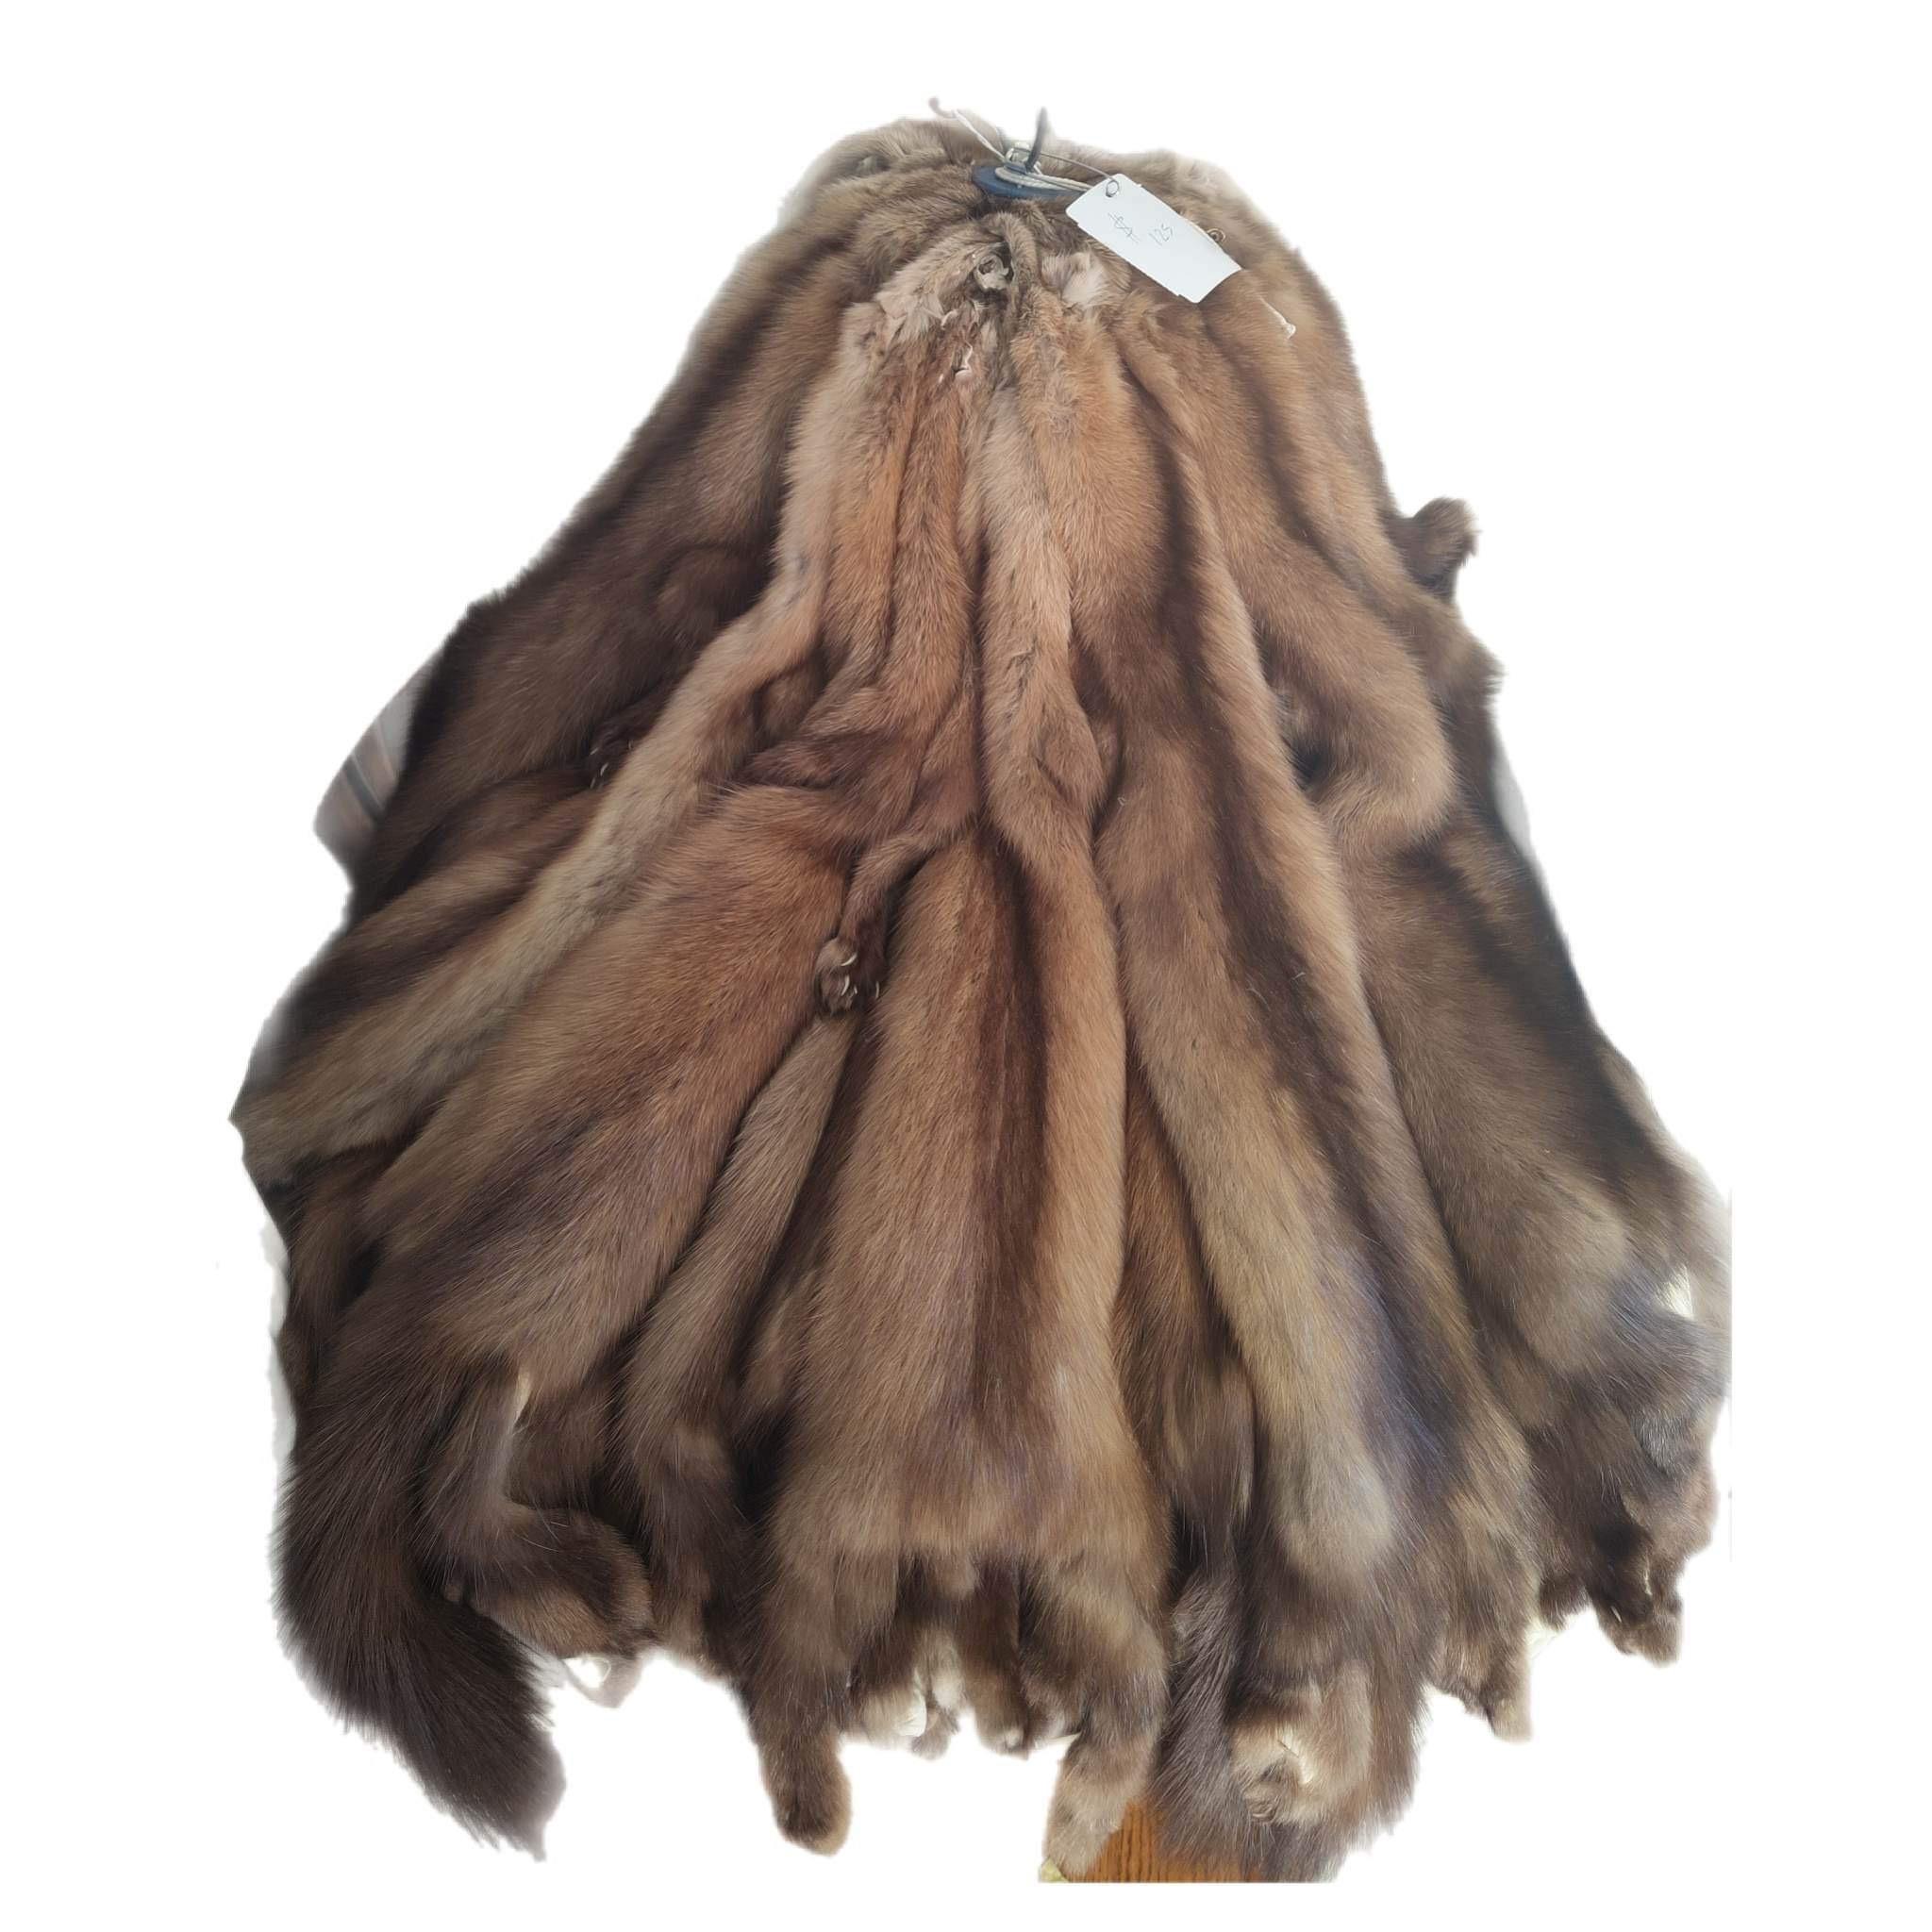 Brand Russian new sable fur coat size M In New Condition For Sale In Montreal, Quebec